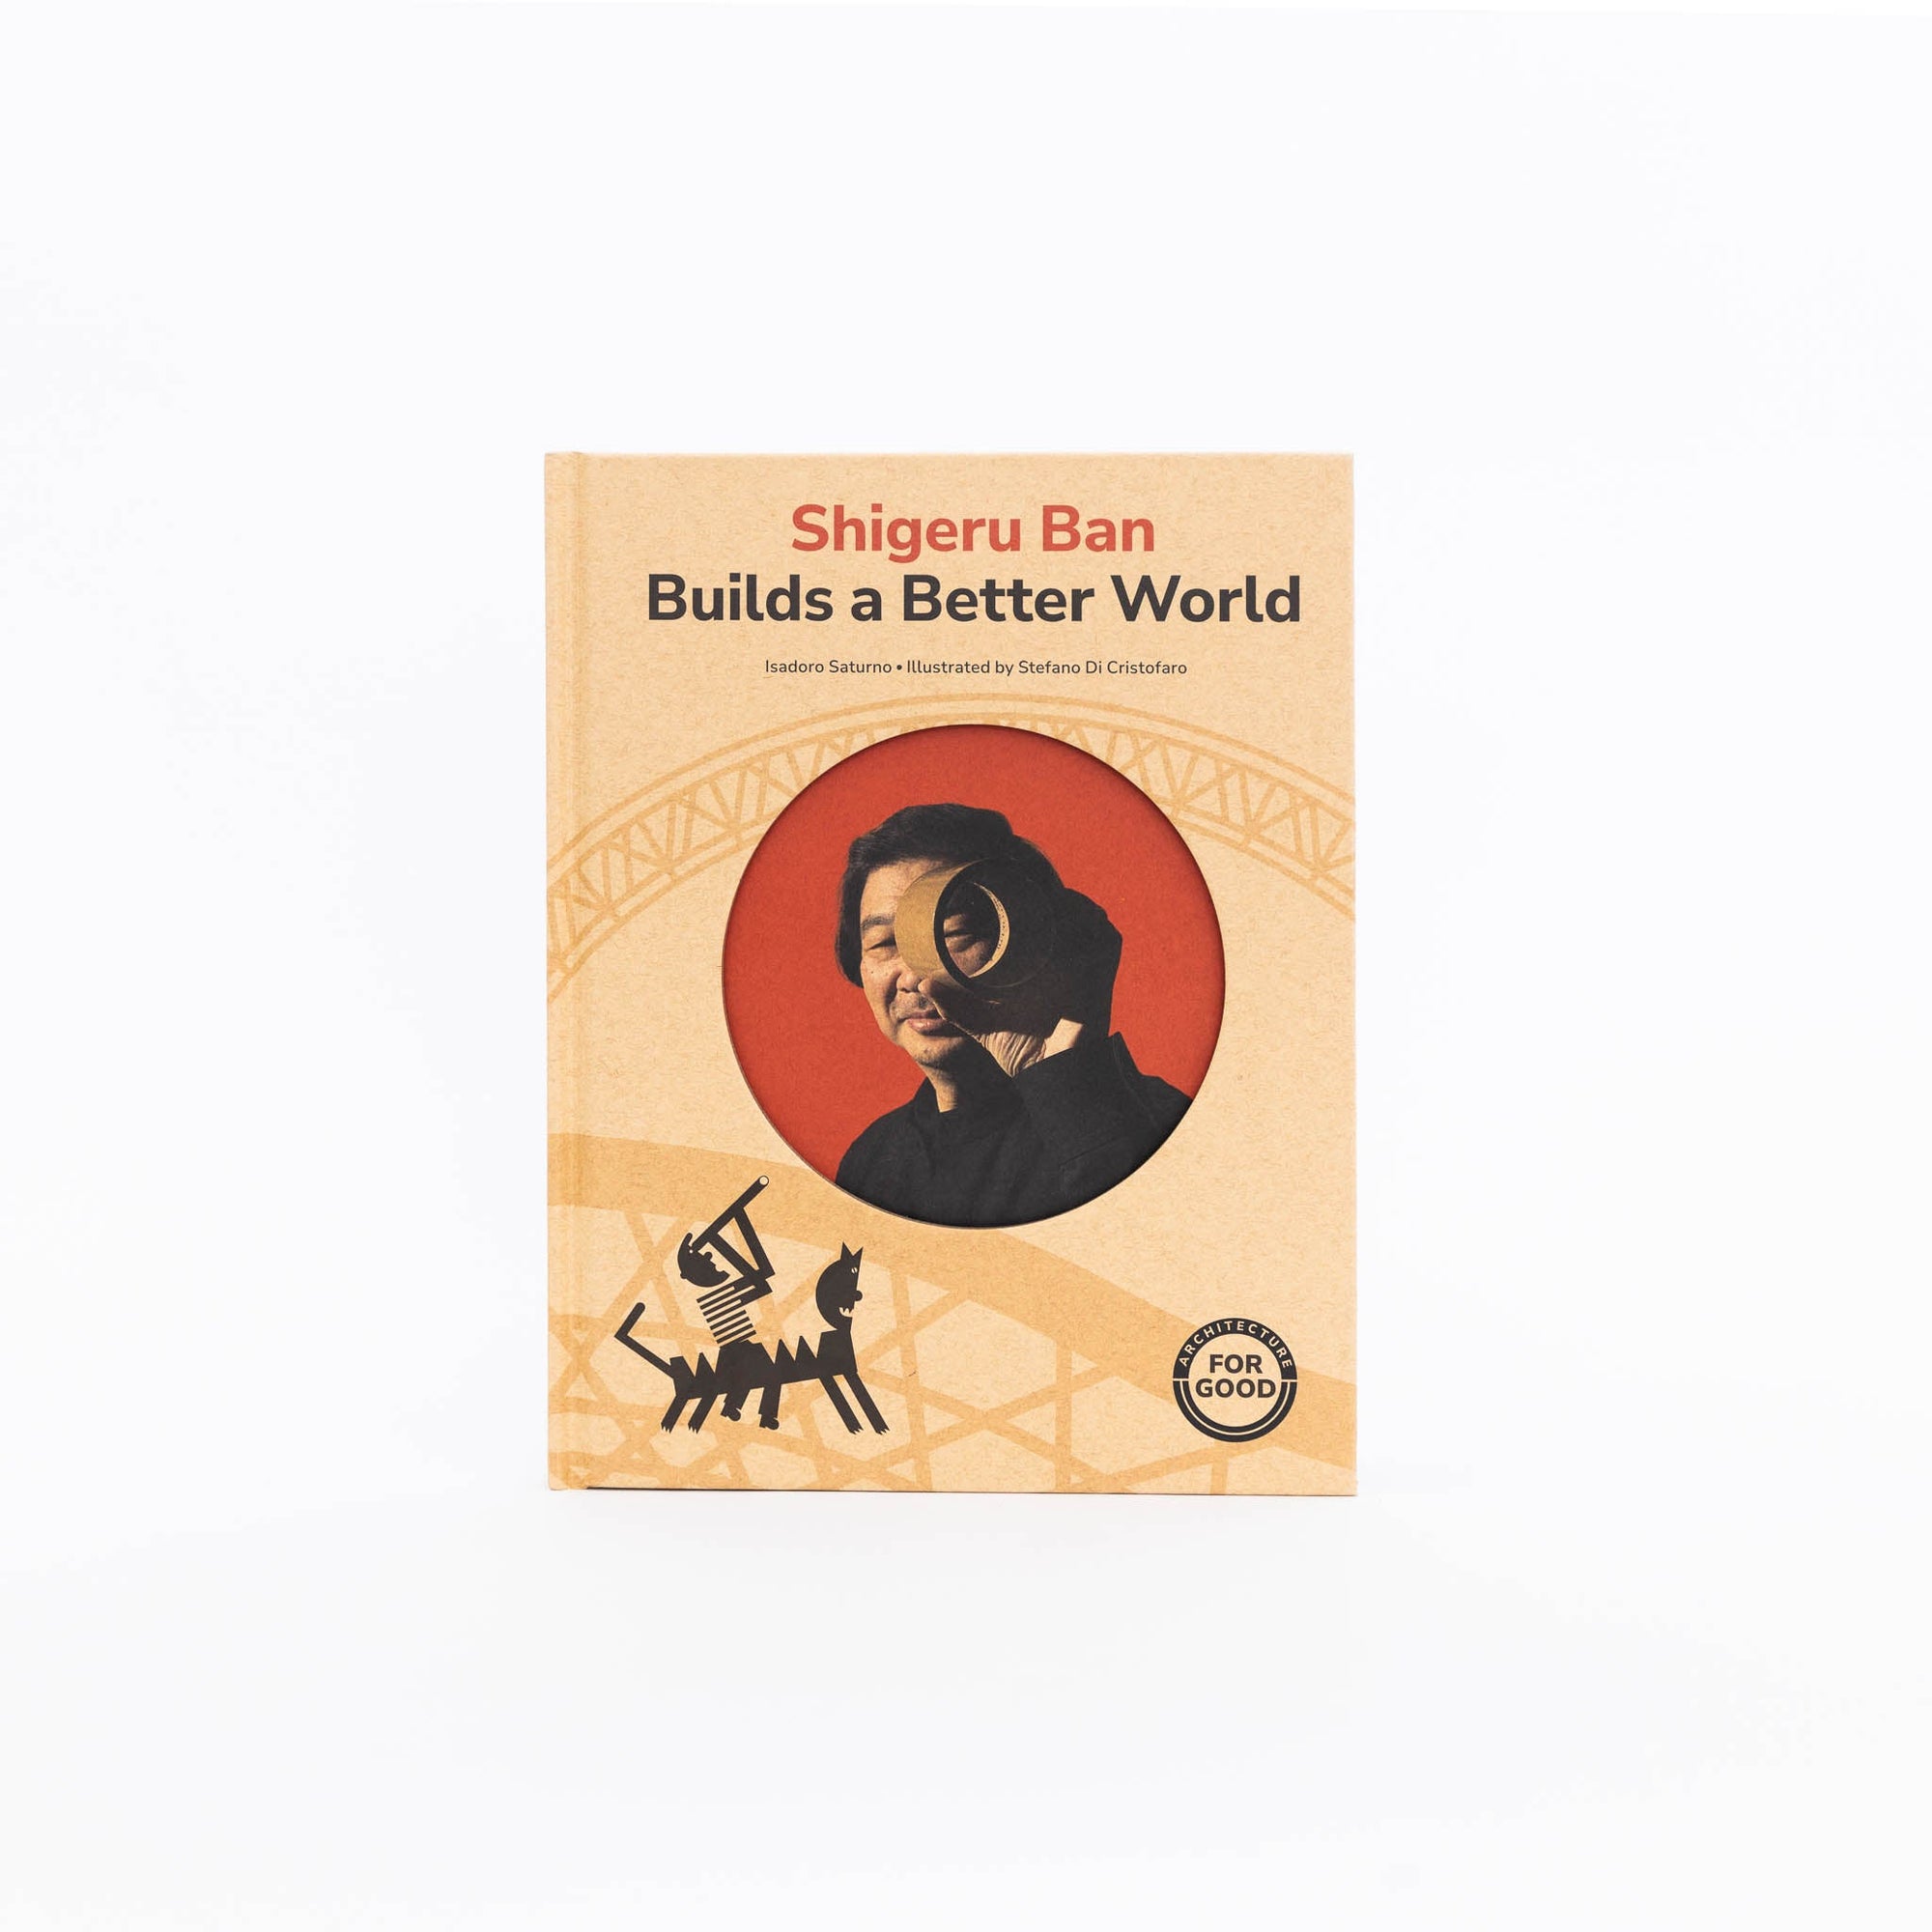 Shigeru Ban Builds a Better World by Isadoro Saturno | Tortoise General Store